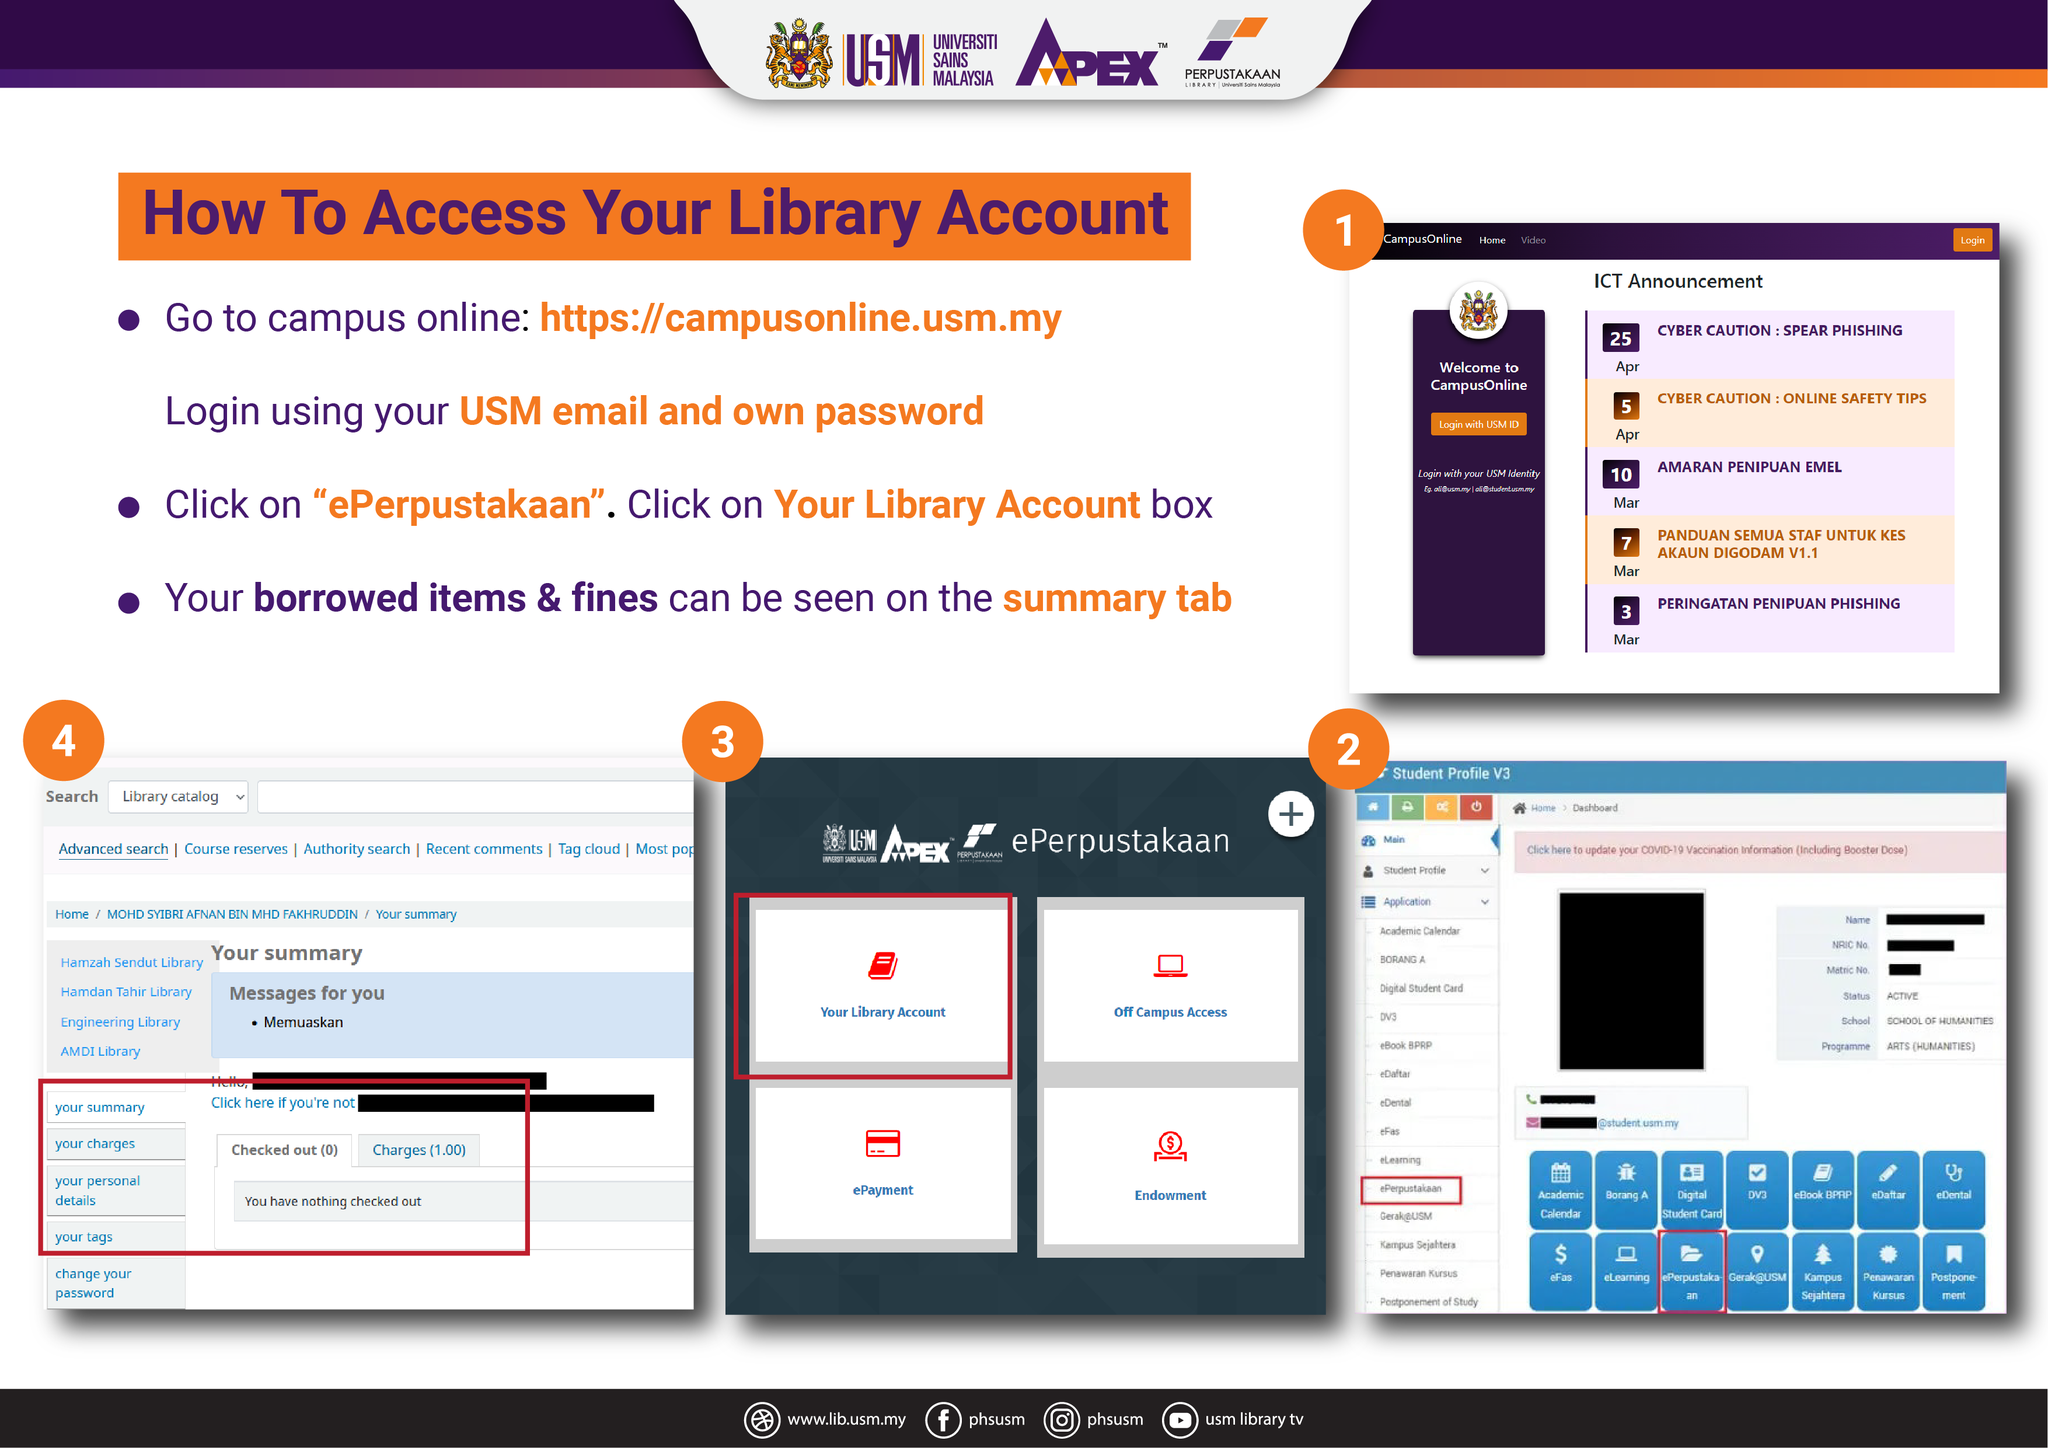 How to access your library account